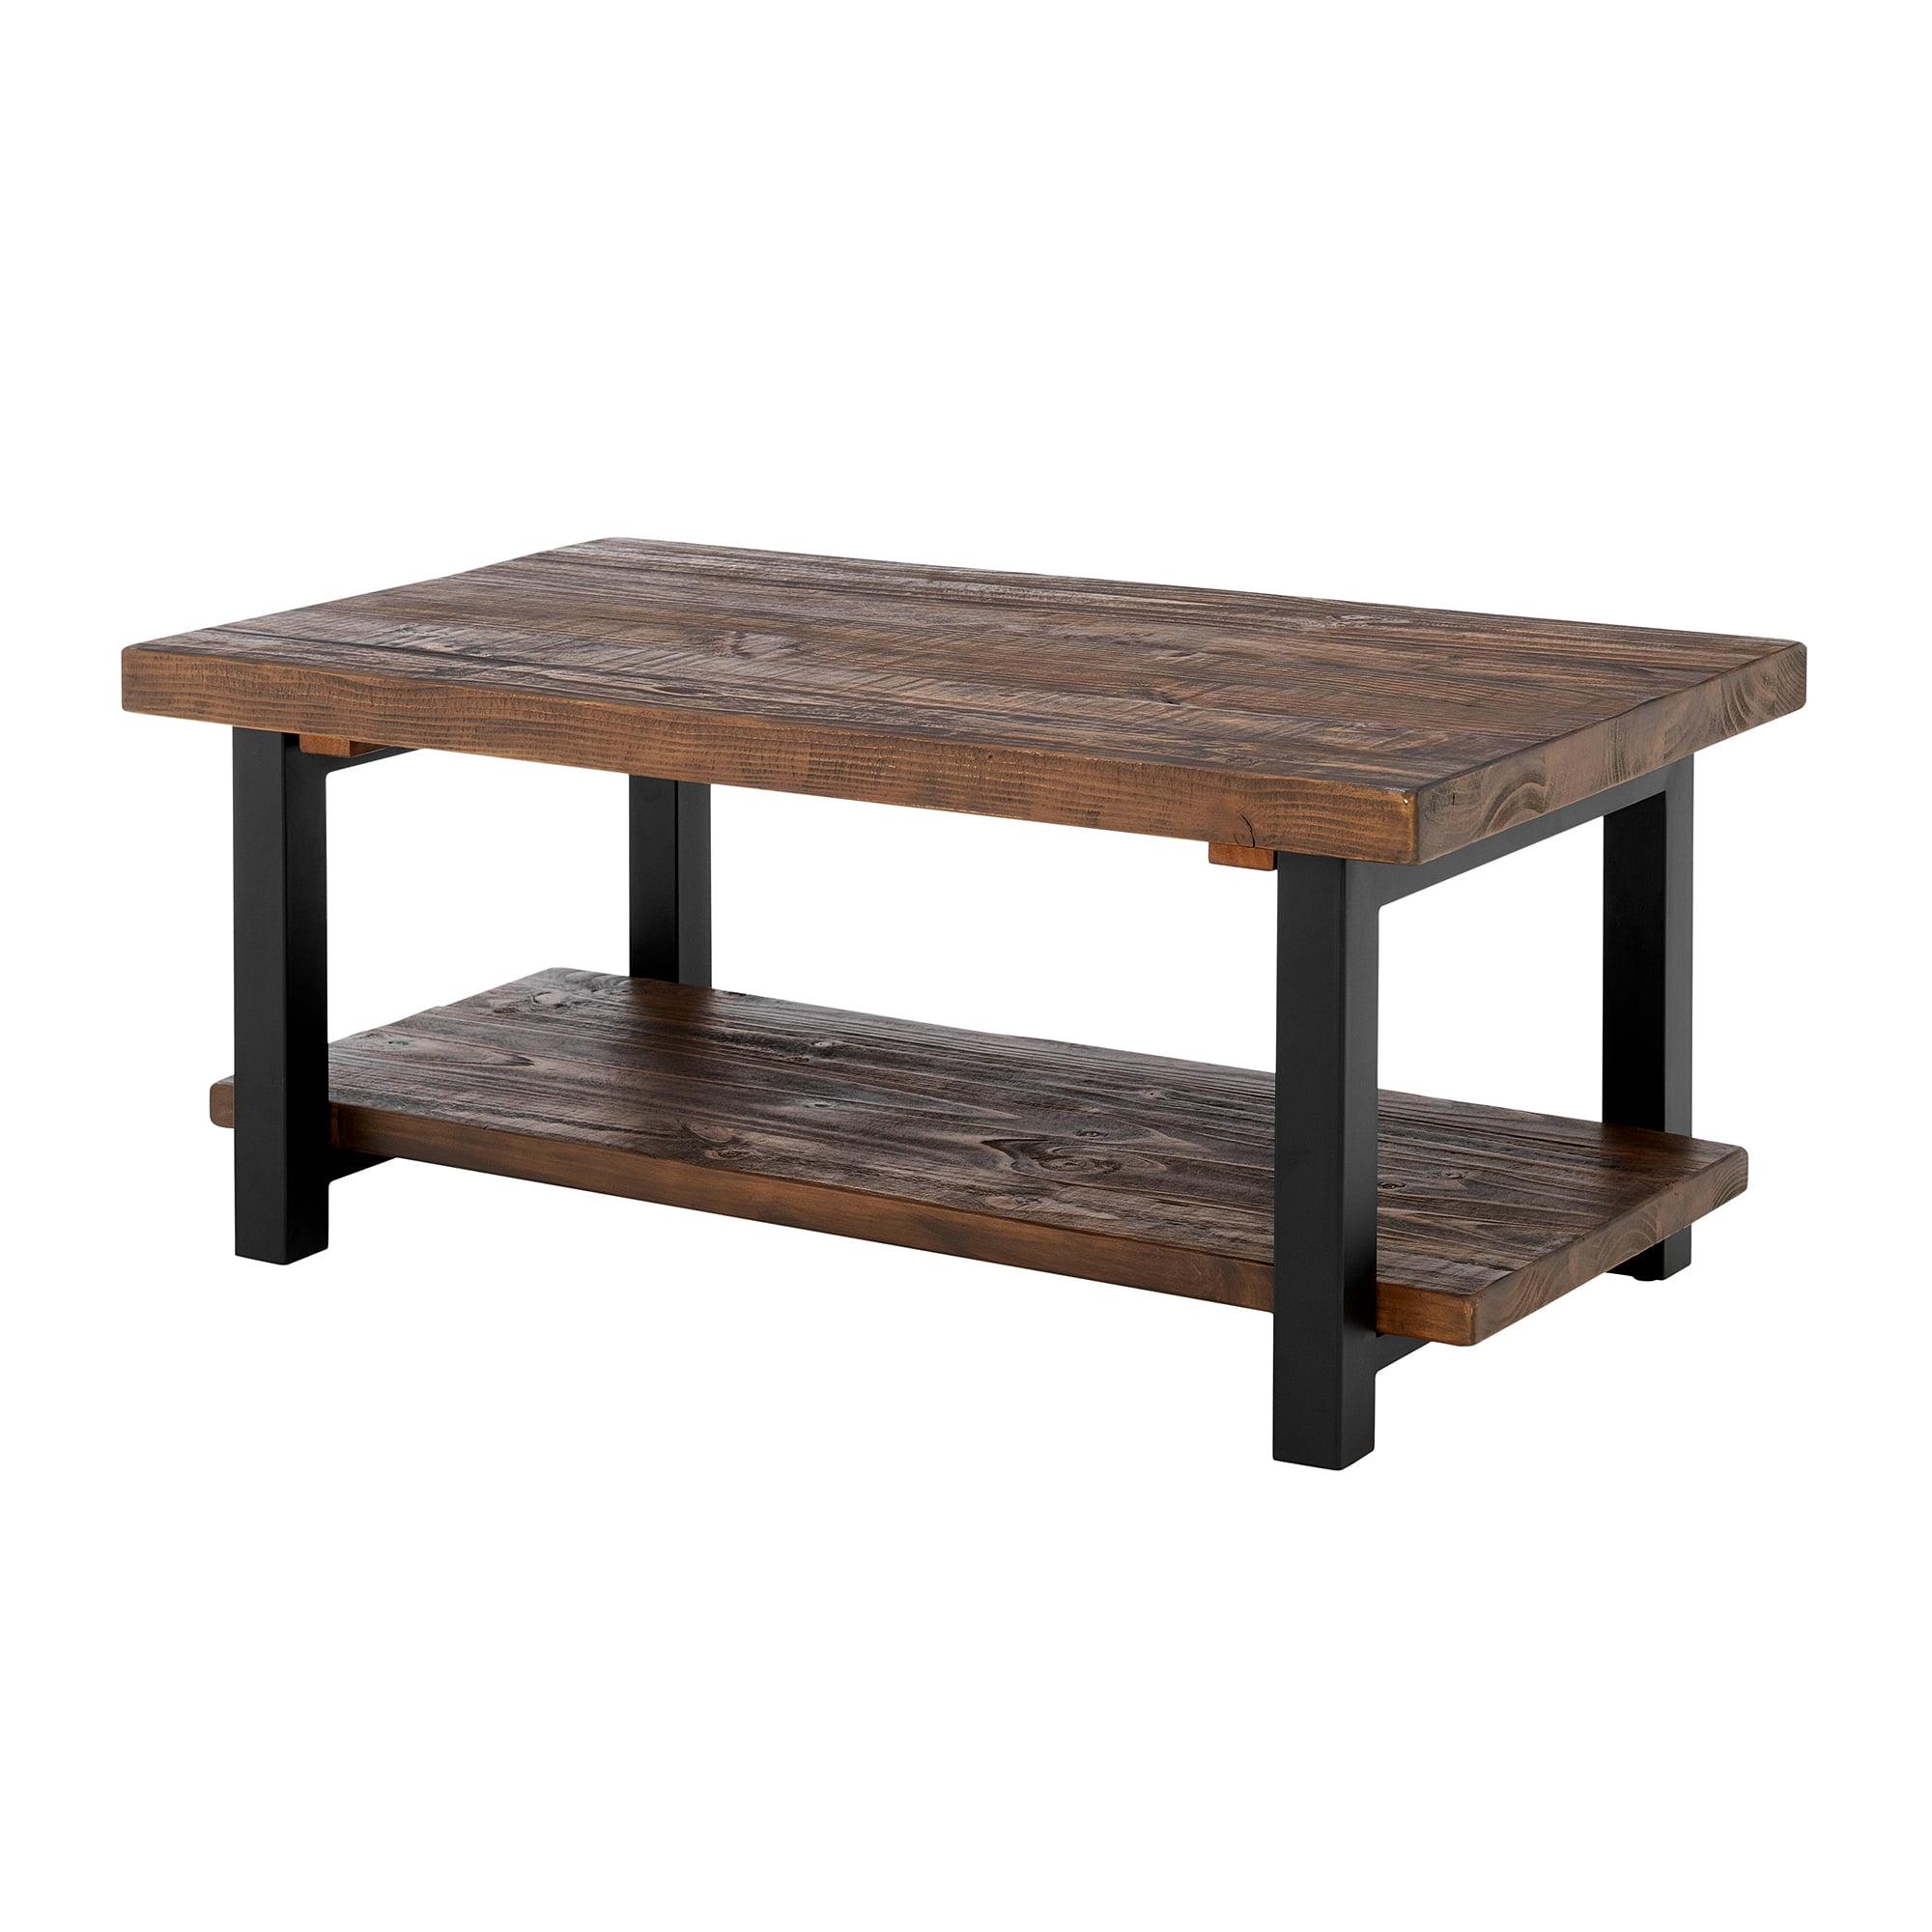 Pomona 42" Rustic Natural Wood and Metal Coffee Table